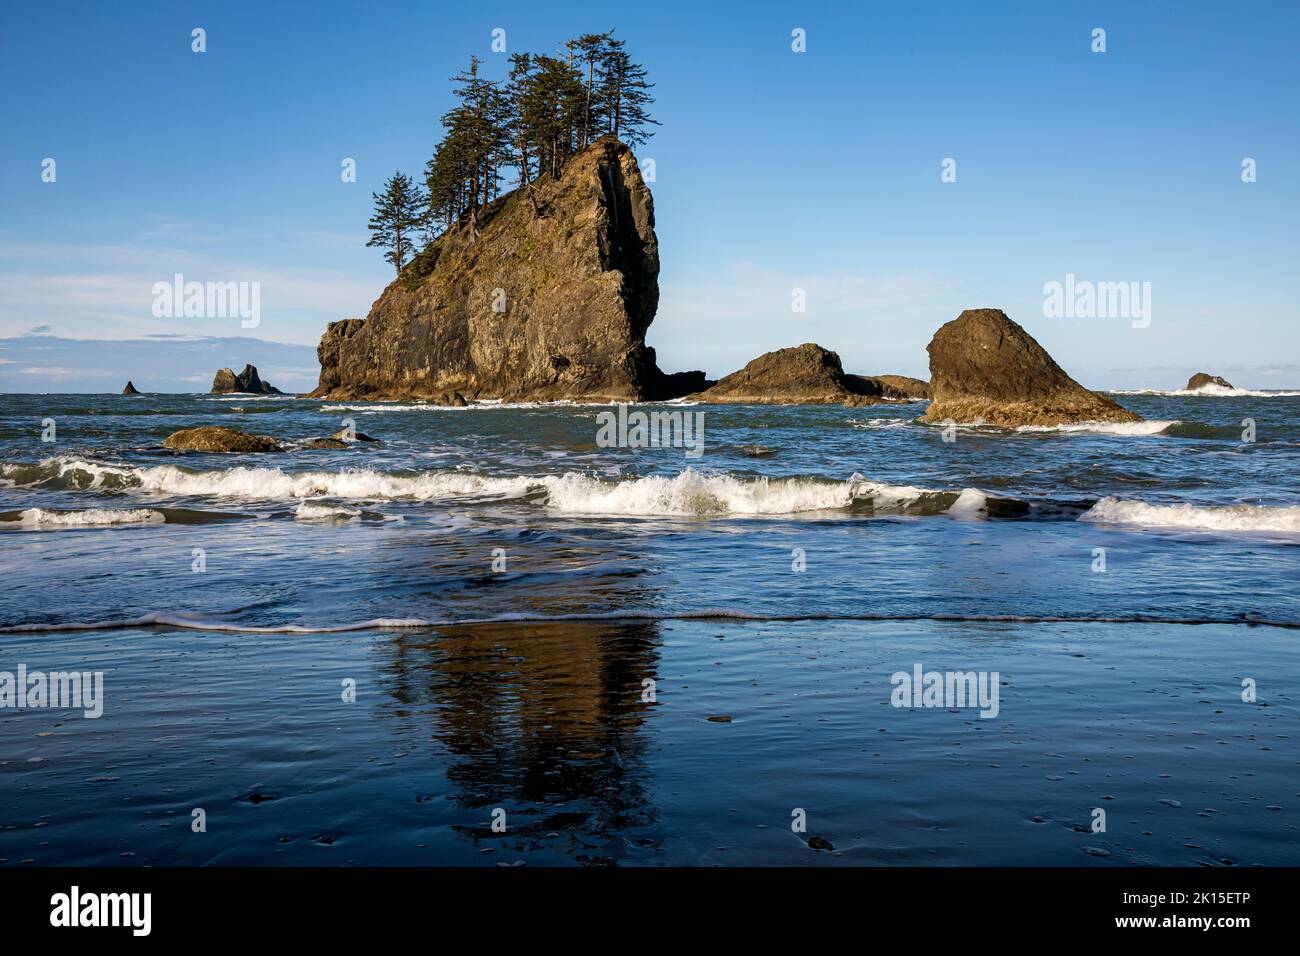 WA22009-00...WASHINGTON - Rock island in the Pacific Ocean viewed from Second Beach in Olympic National Park. Stock Photo